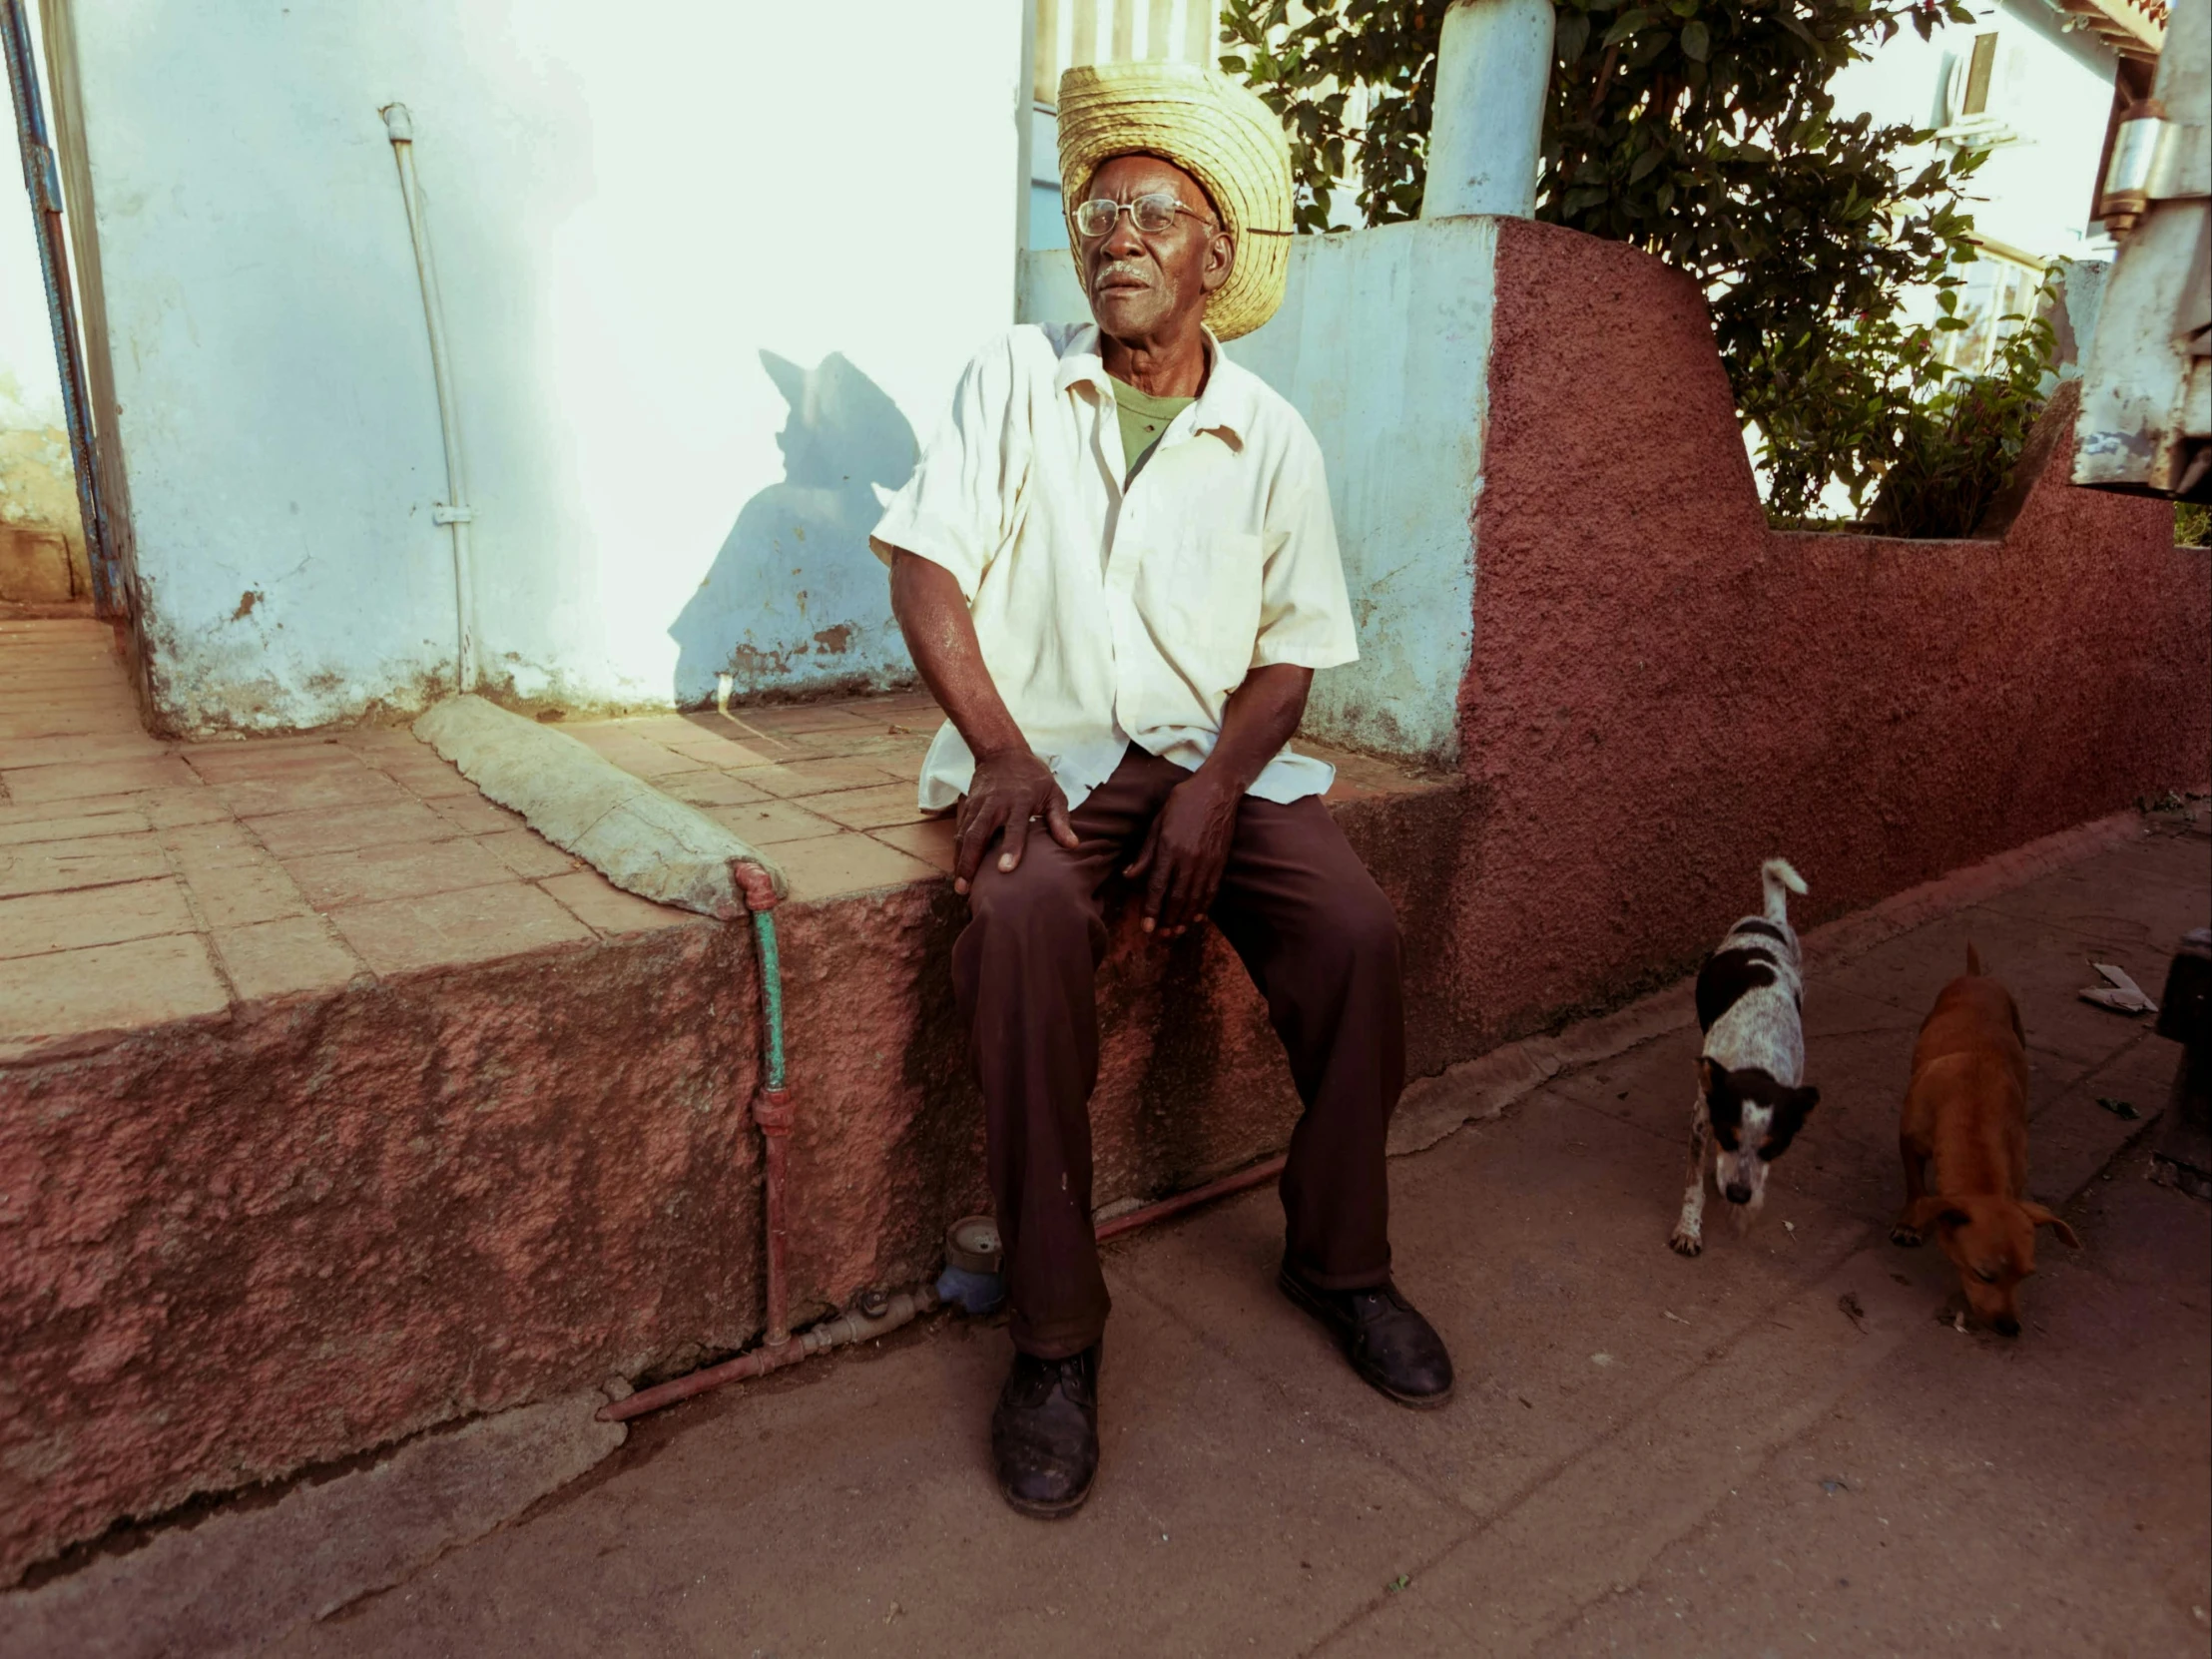 a man sitting on the ground and a small dog walking by